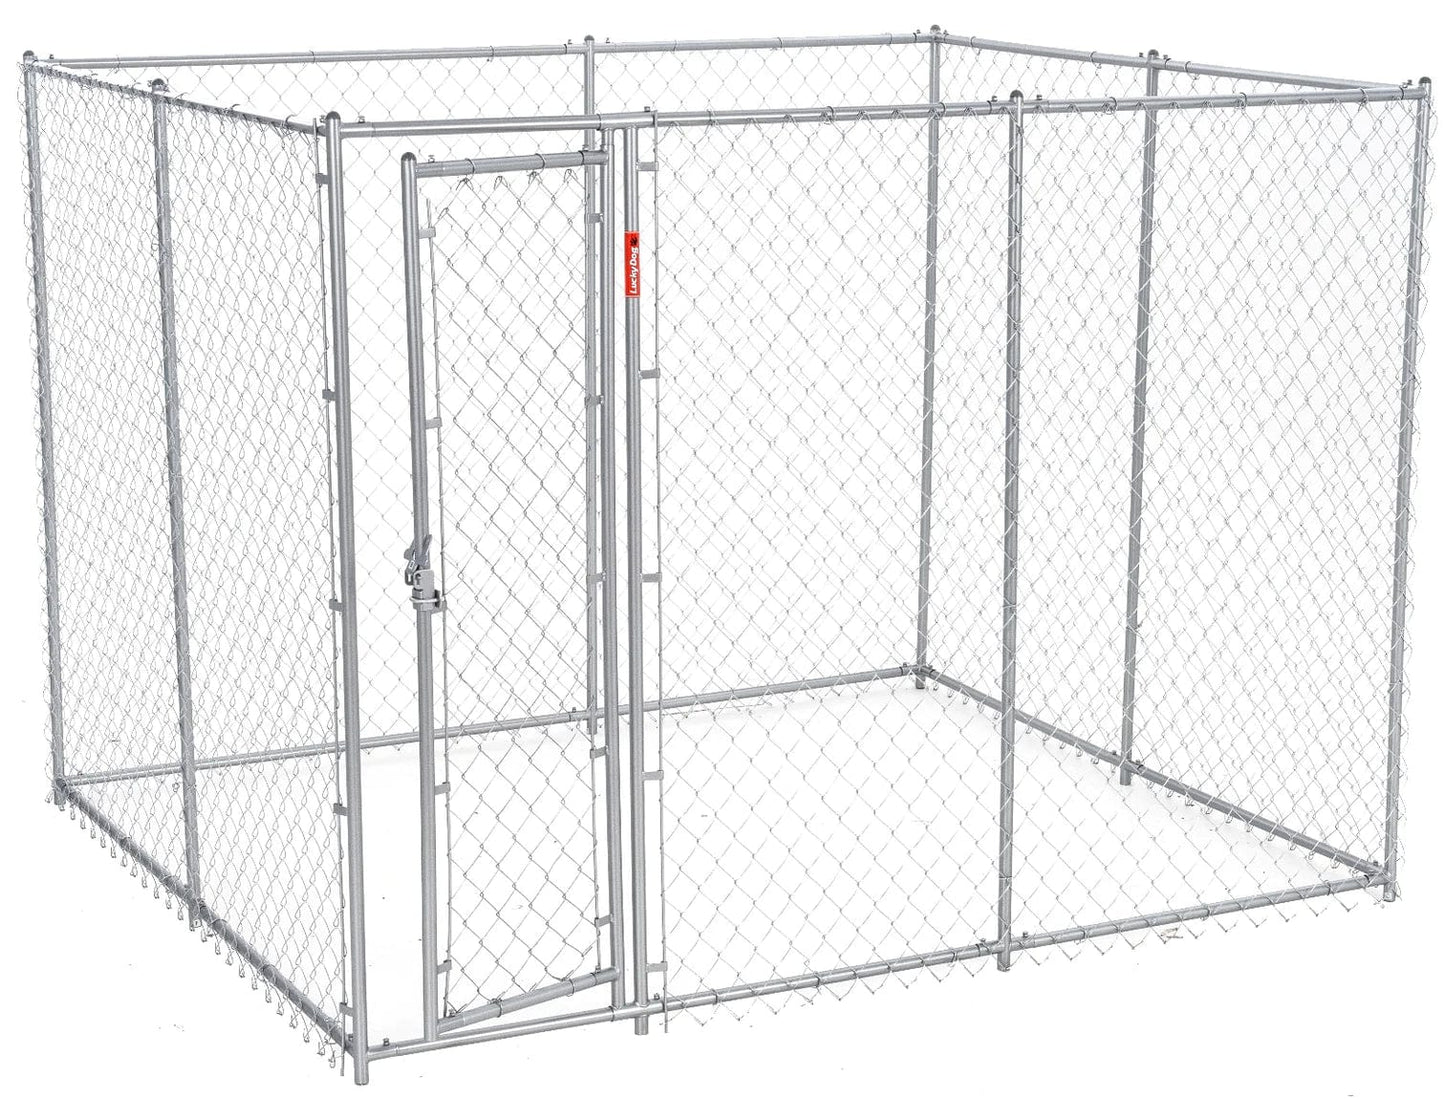 Lucky Dog Galvanized Chain Link w/PC Frame Kit in a Box 10'L x 5'W x 6'H